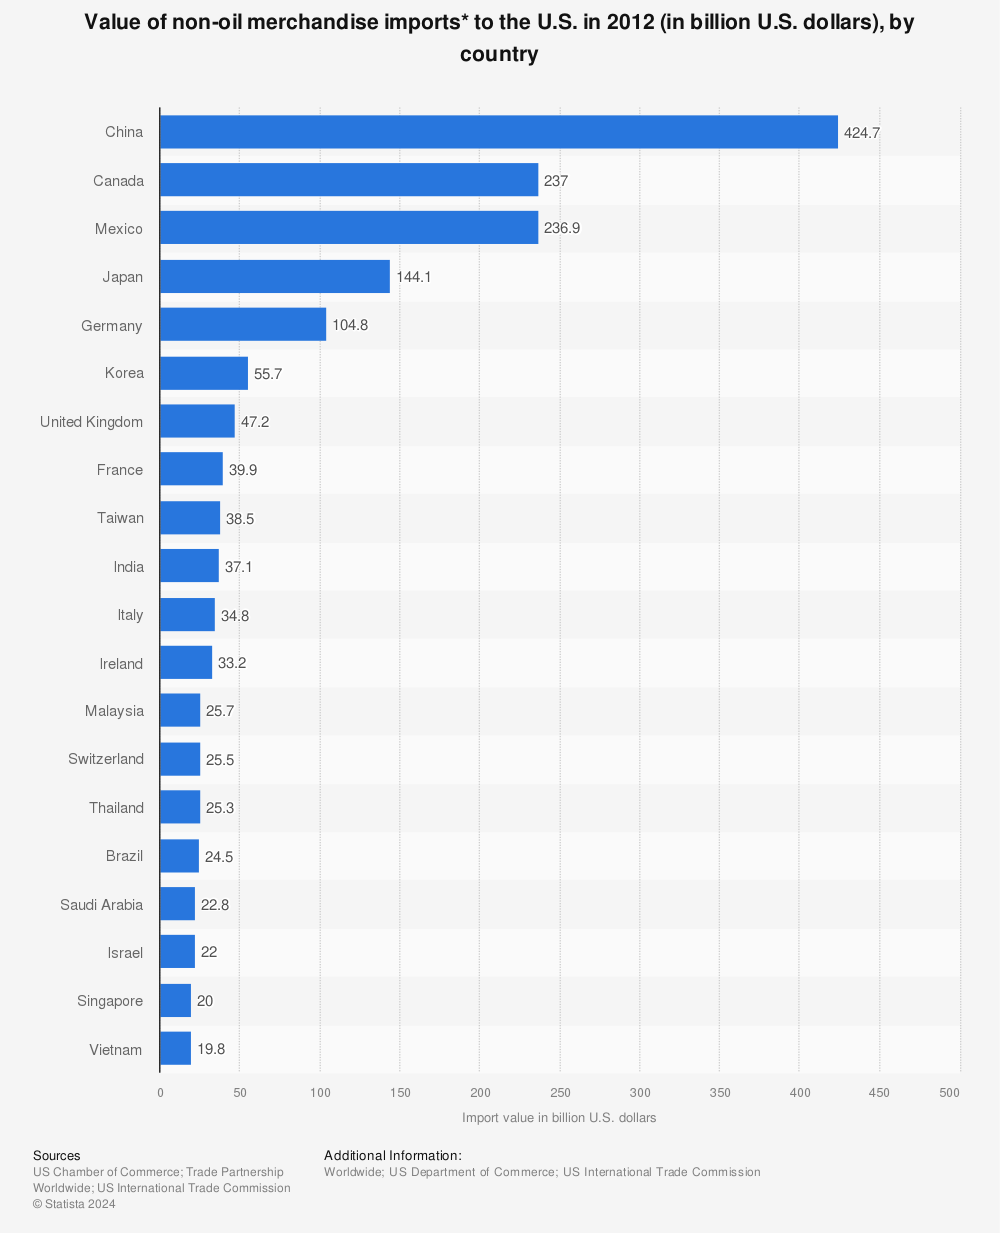 Statistic: Value of non-oil merchandise imports* to the U.S. in 2012 (in billion U.S. dollars), by country | Statista